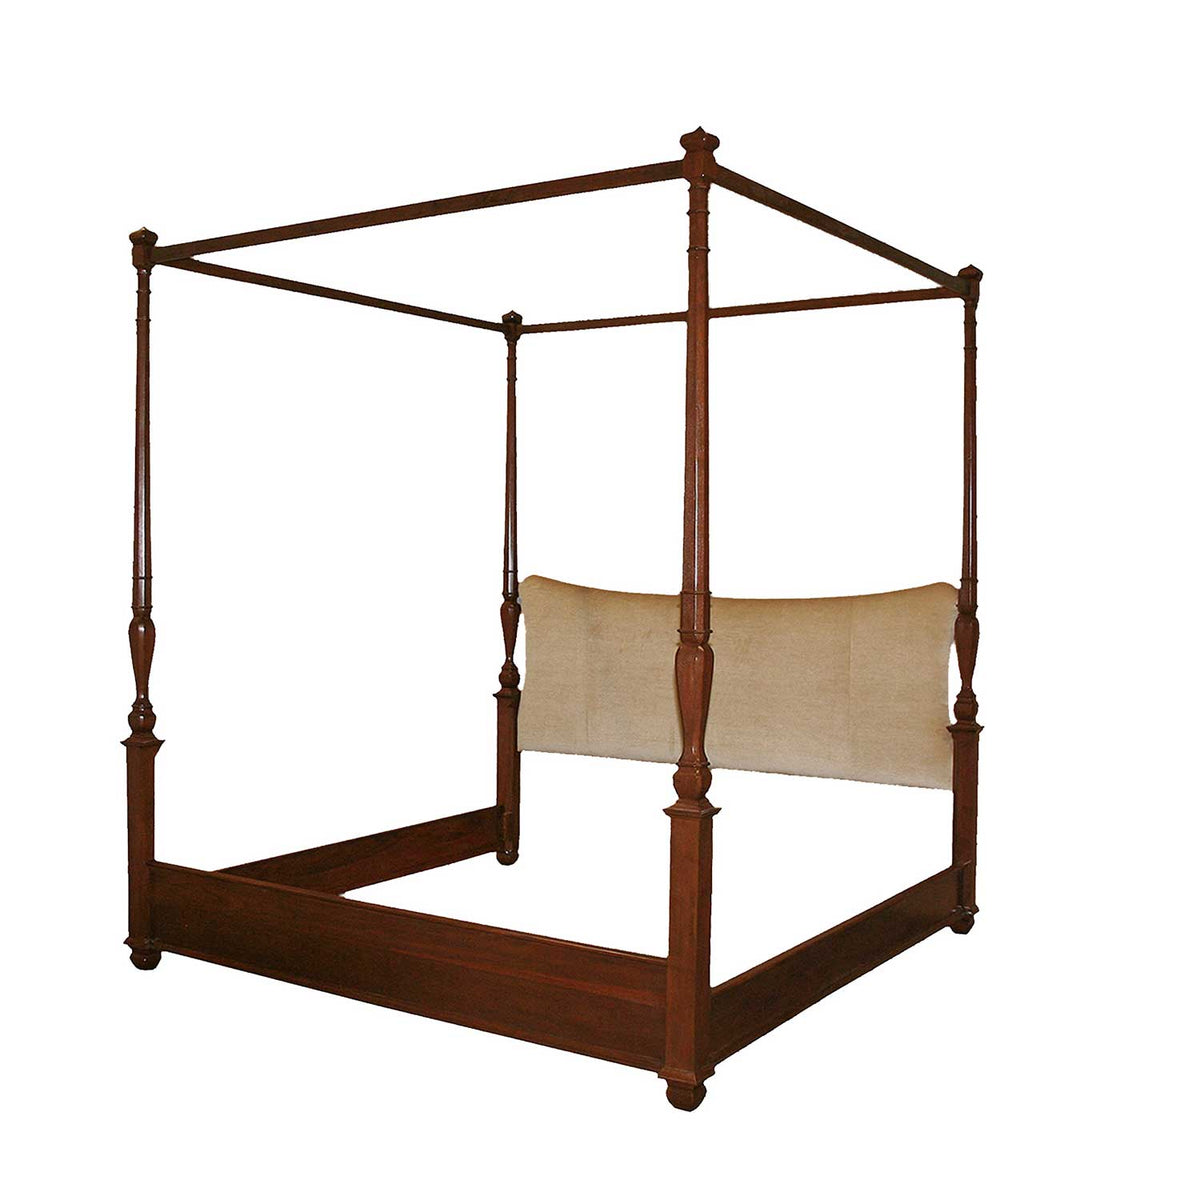 Rye Four Poster Bed - Queen